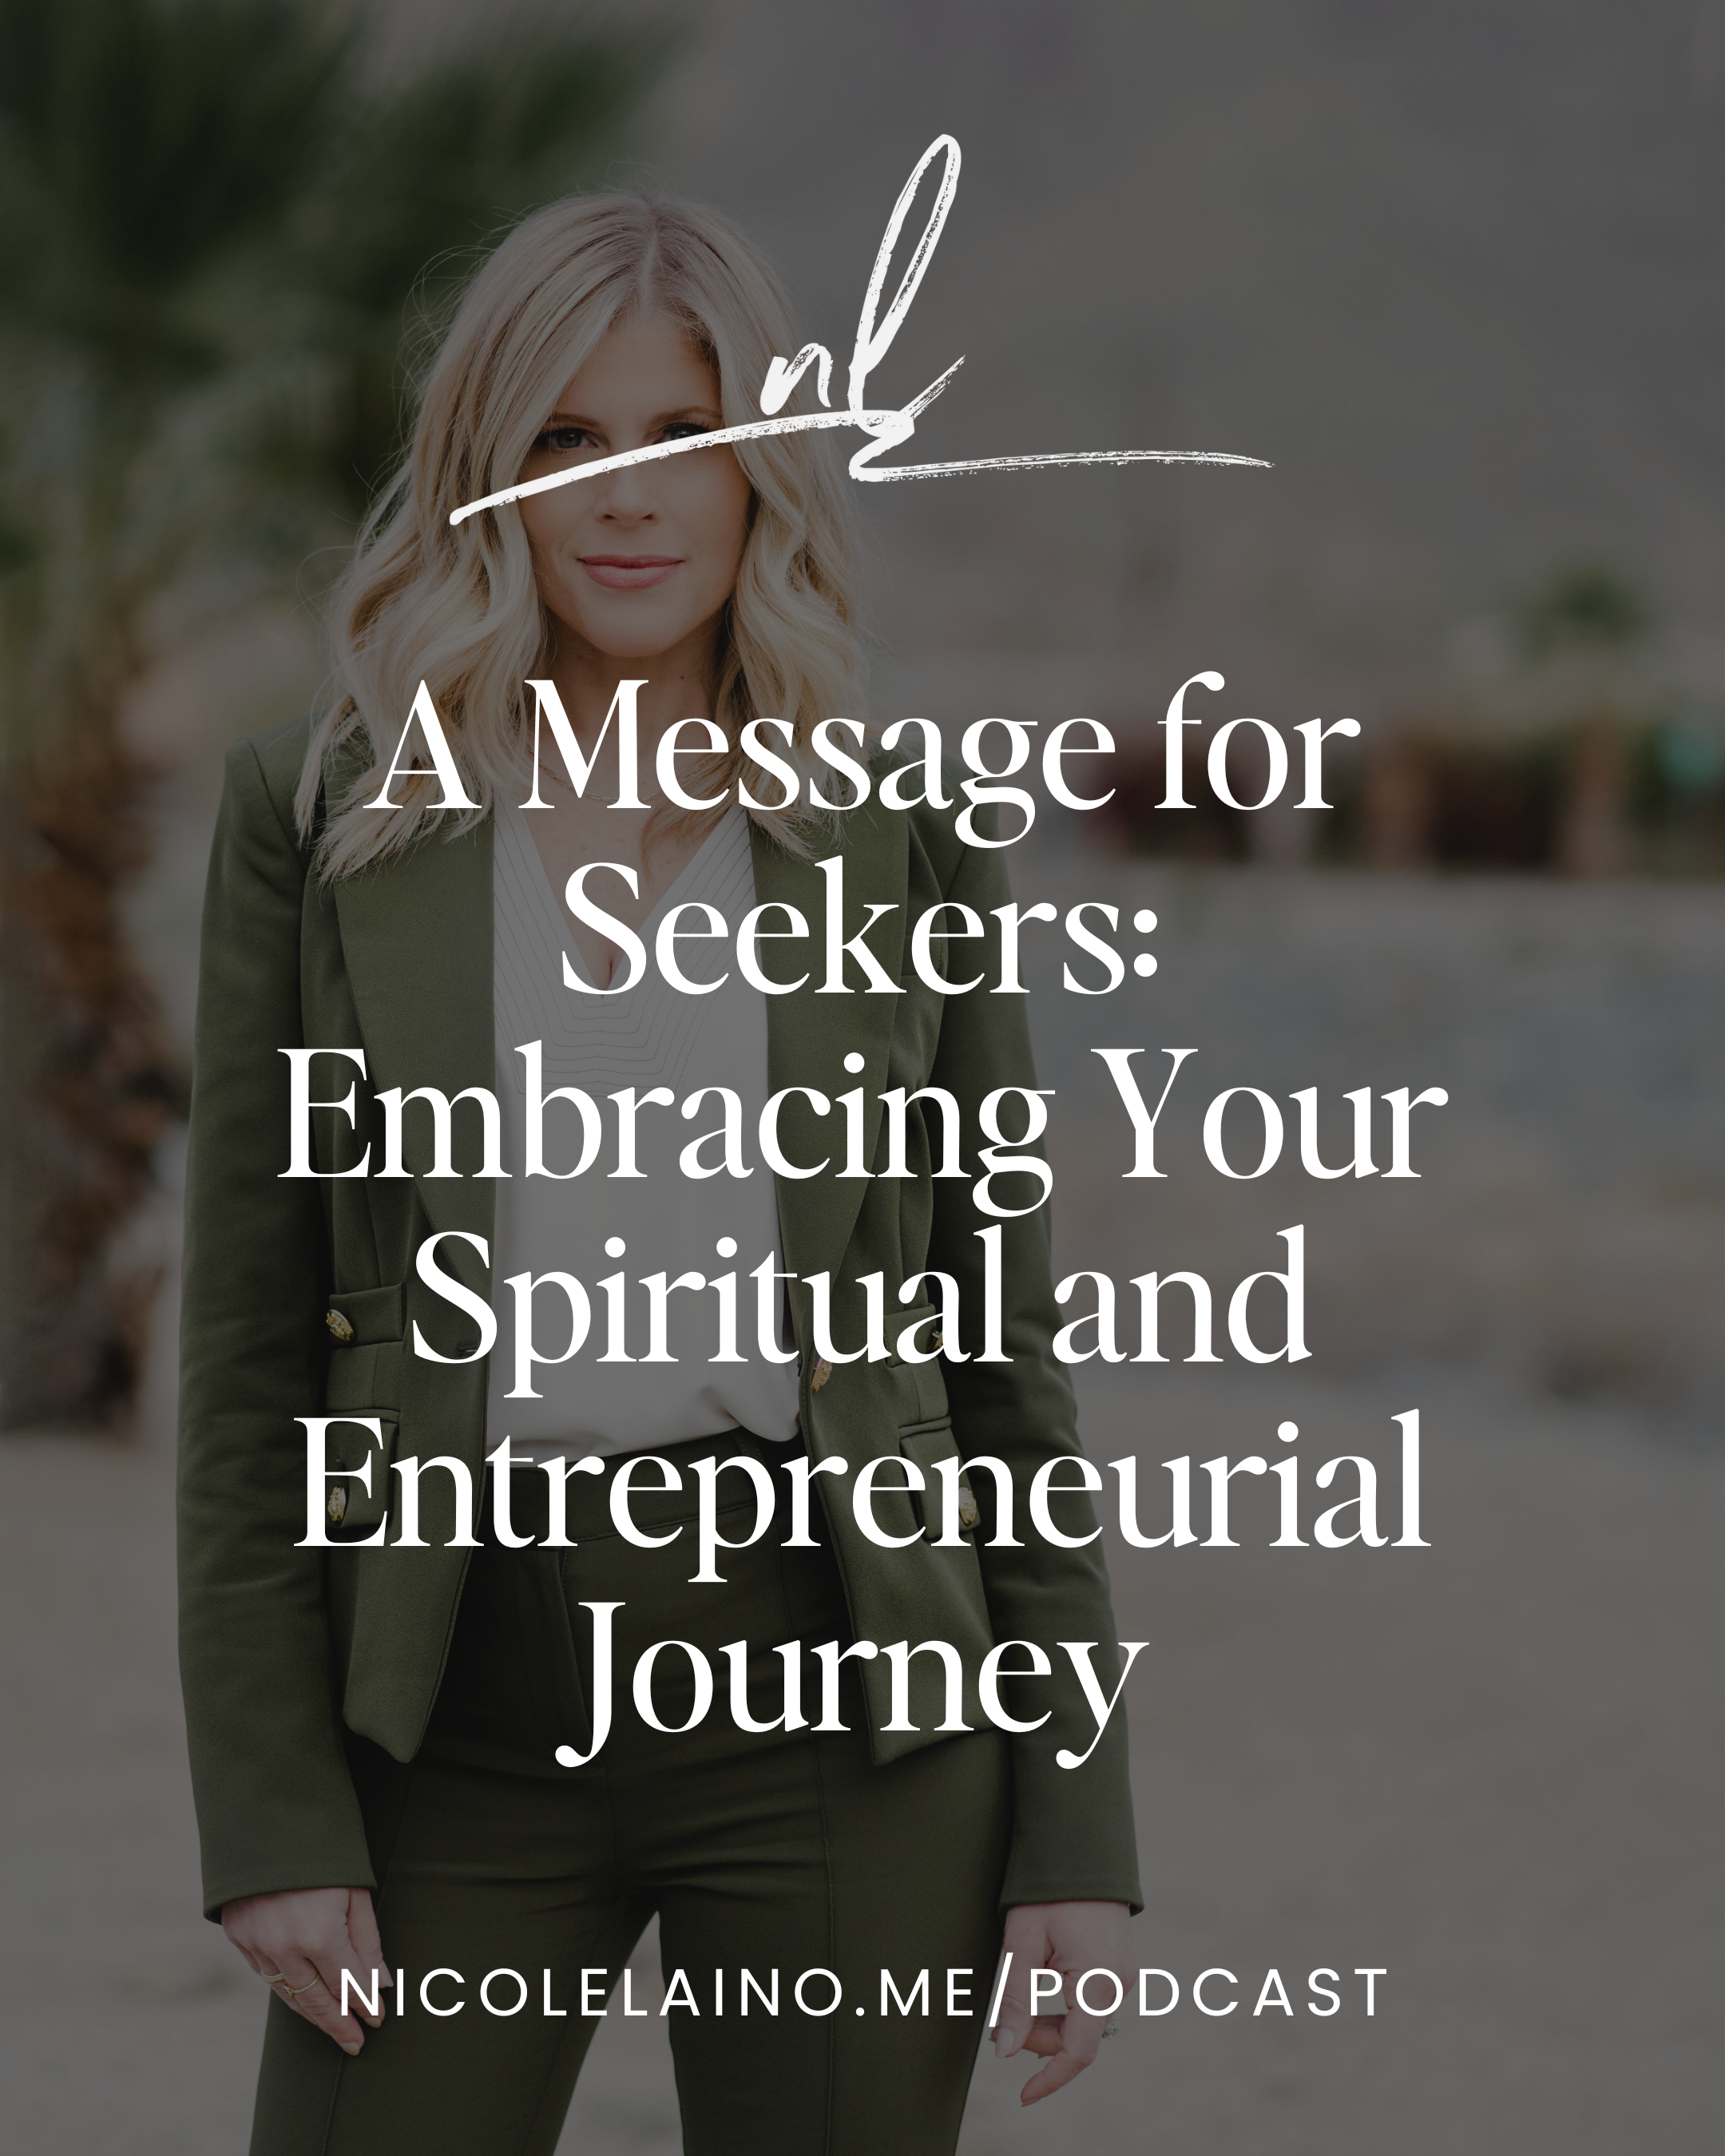 A Message for Seekers: Embracing Your Spiritual and Entrepreneurial Journey